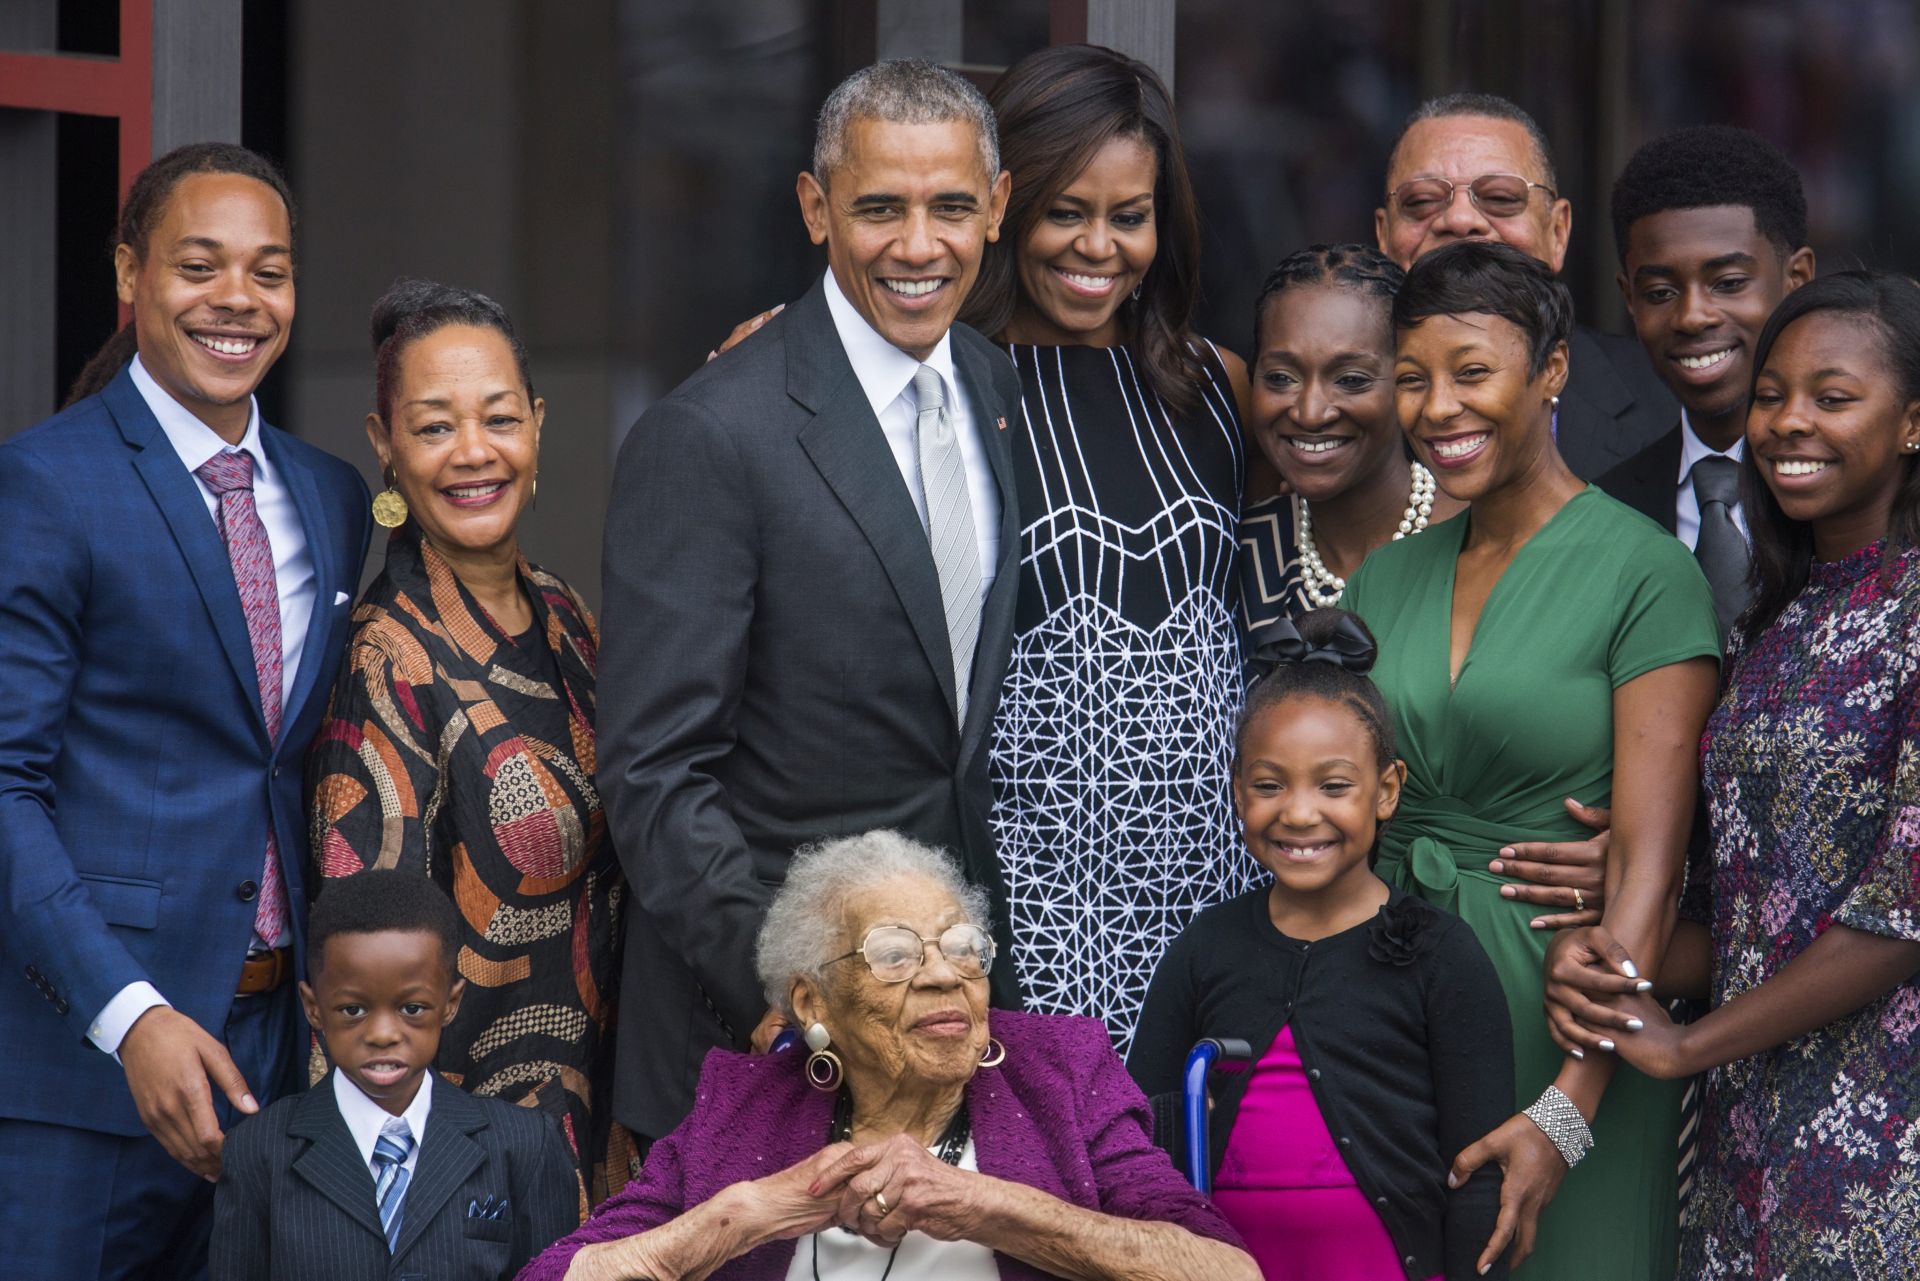 epa05554688 US President Barack Obama and First Lady Michelle Obama, pose with four generations of the Bonner family, who are descendants of slaves, after ringing the First Baptist Church Bell to officially open the Smithsonian's National Museum of African American History and Culture in Washington, DC, USA, 24 September 2016. The opening ceremonies of the 400,000-square-foot museum attracted thousands of attendees.  EPA/JIM LO SCALZO